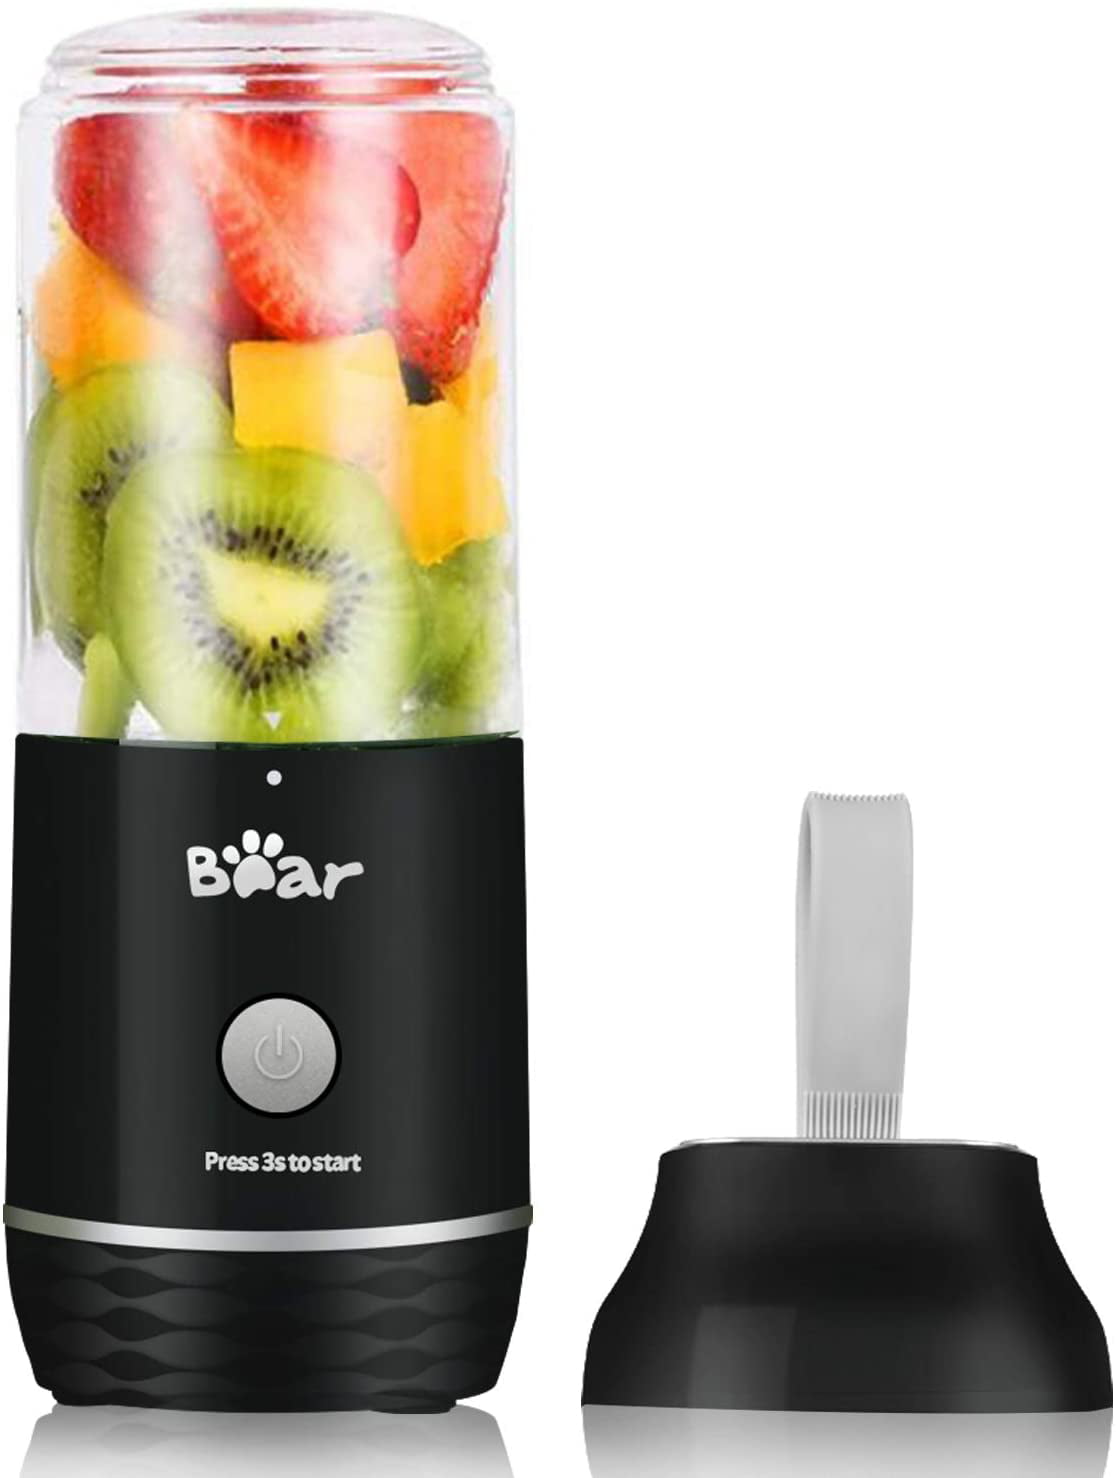 Bear Blender, 1000W Professional Smoothie Blender for Shakes and Smoothies  with 51 Oz Glass Jar, Step-less Speed Knob and 3 Functions for Crushing